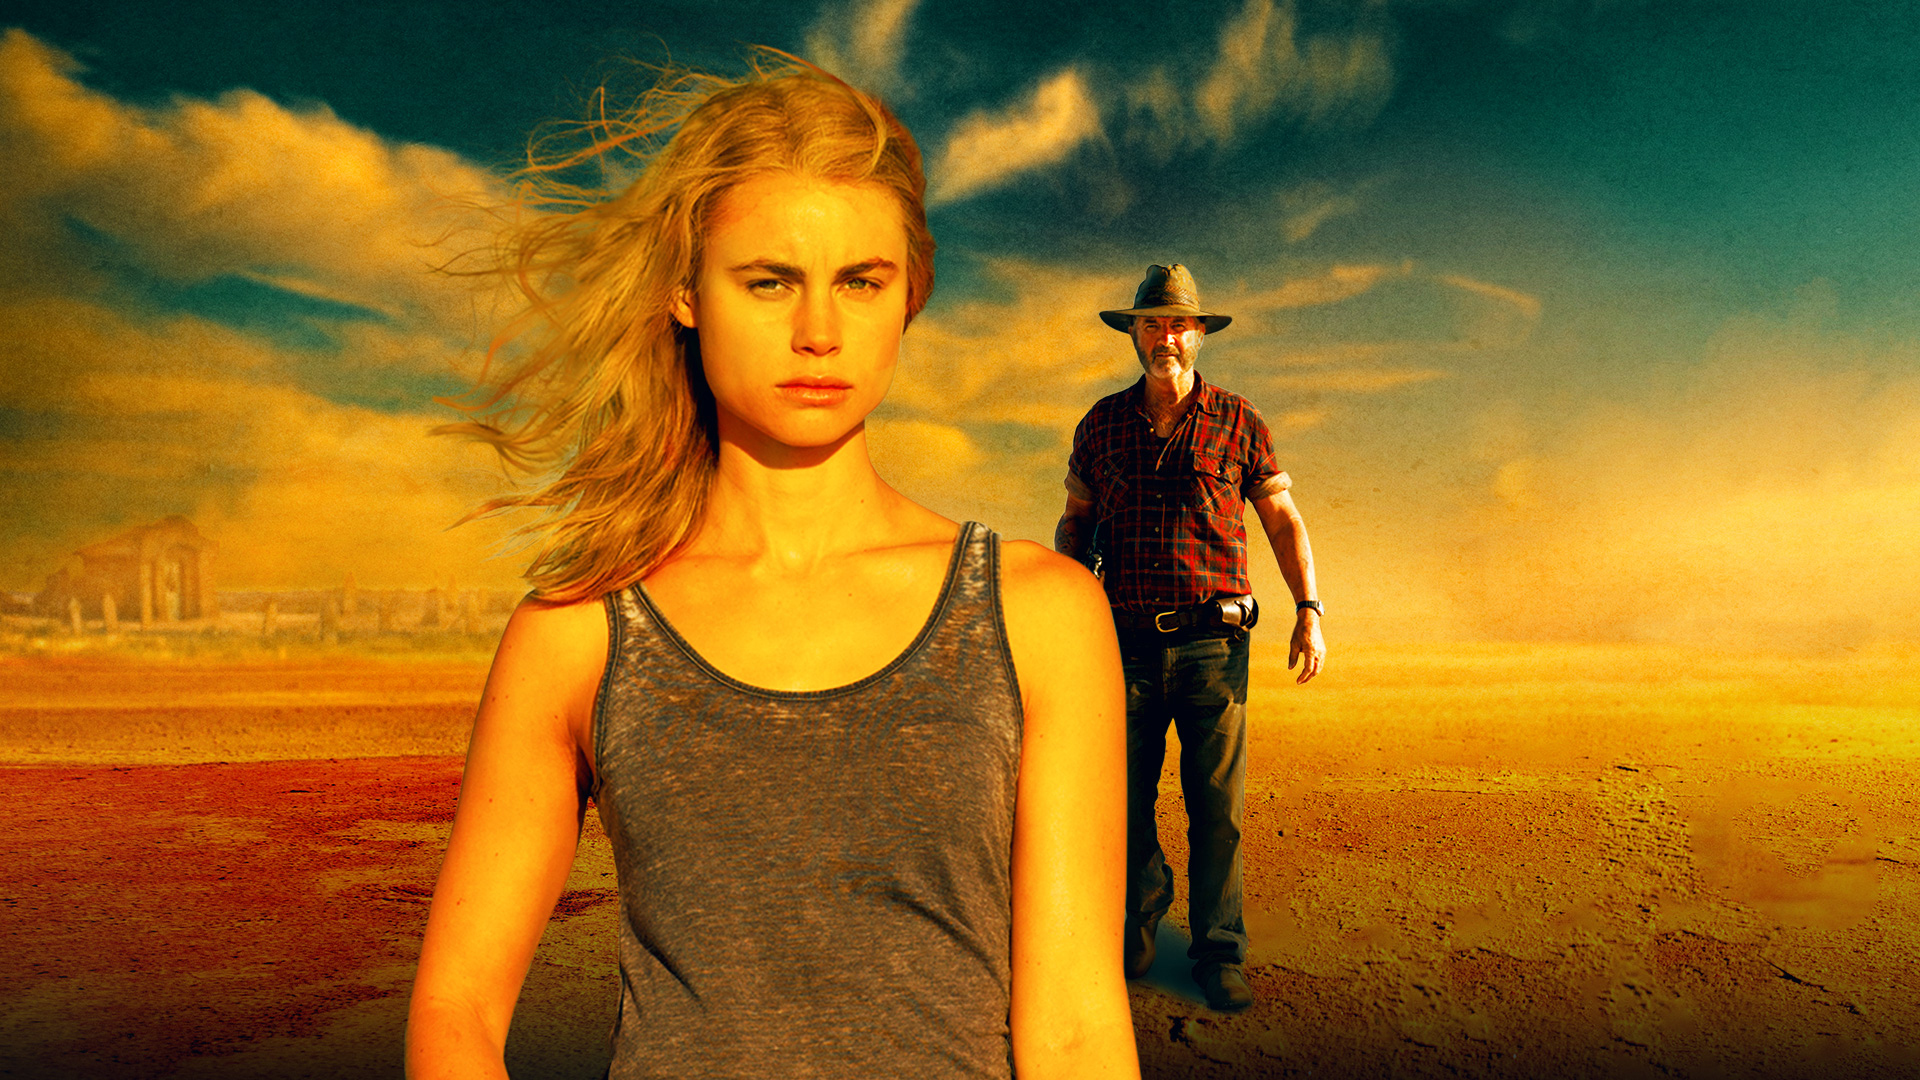 Wolf Creek Season 2 confirmed for more Mick Taylor. SciFiNow